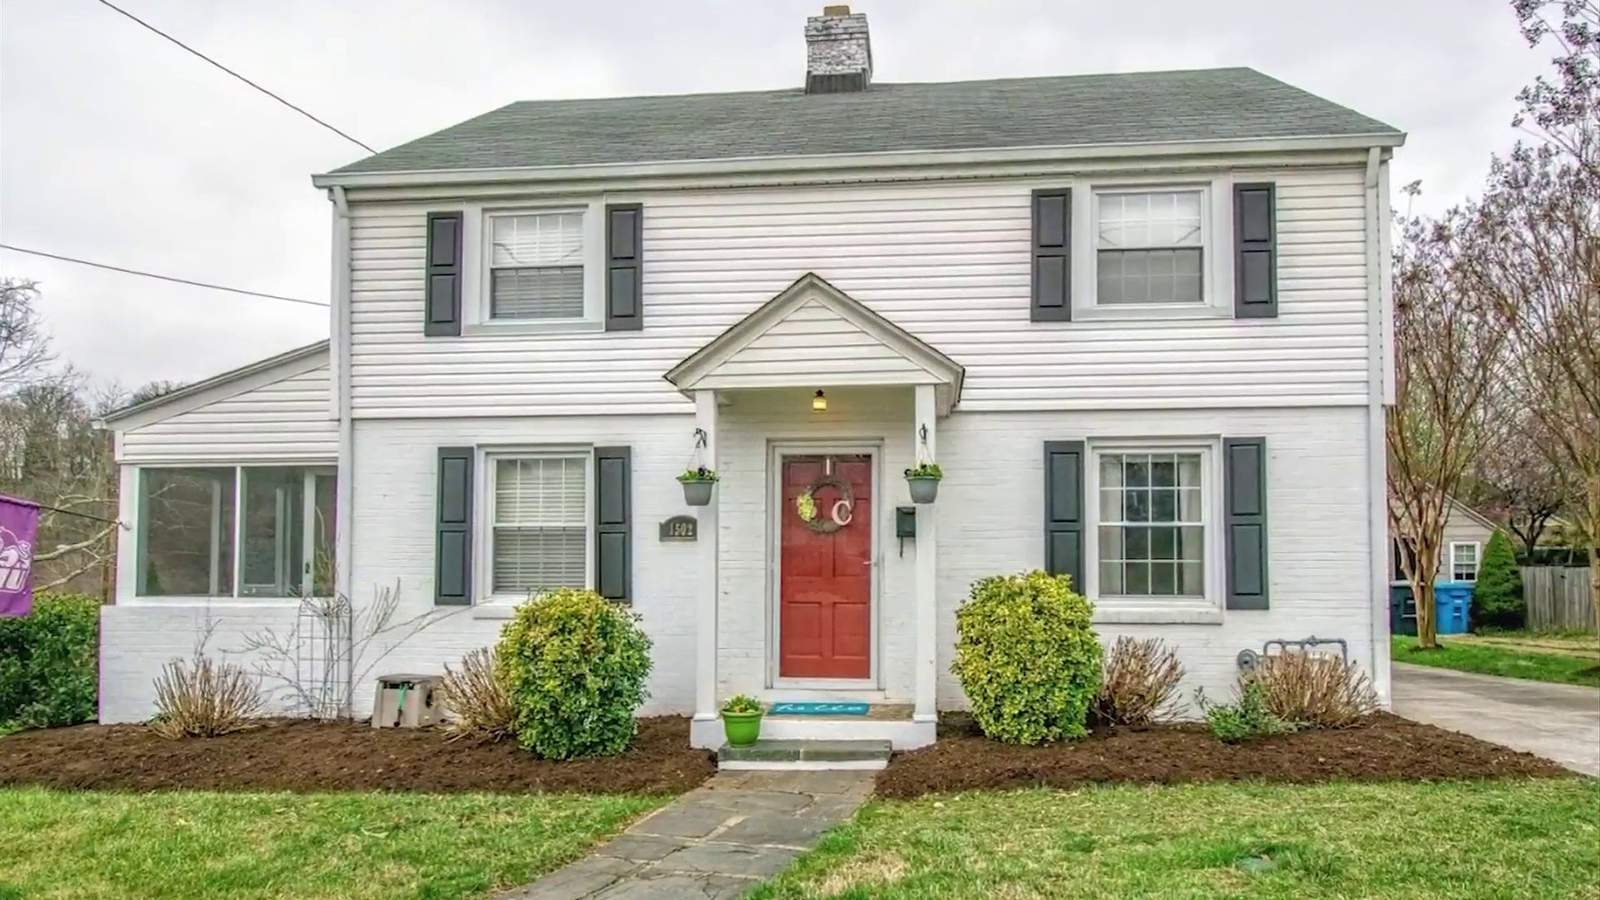 This Raleigh Court home is waiting for you to move in